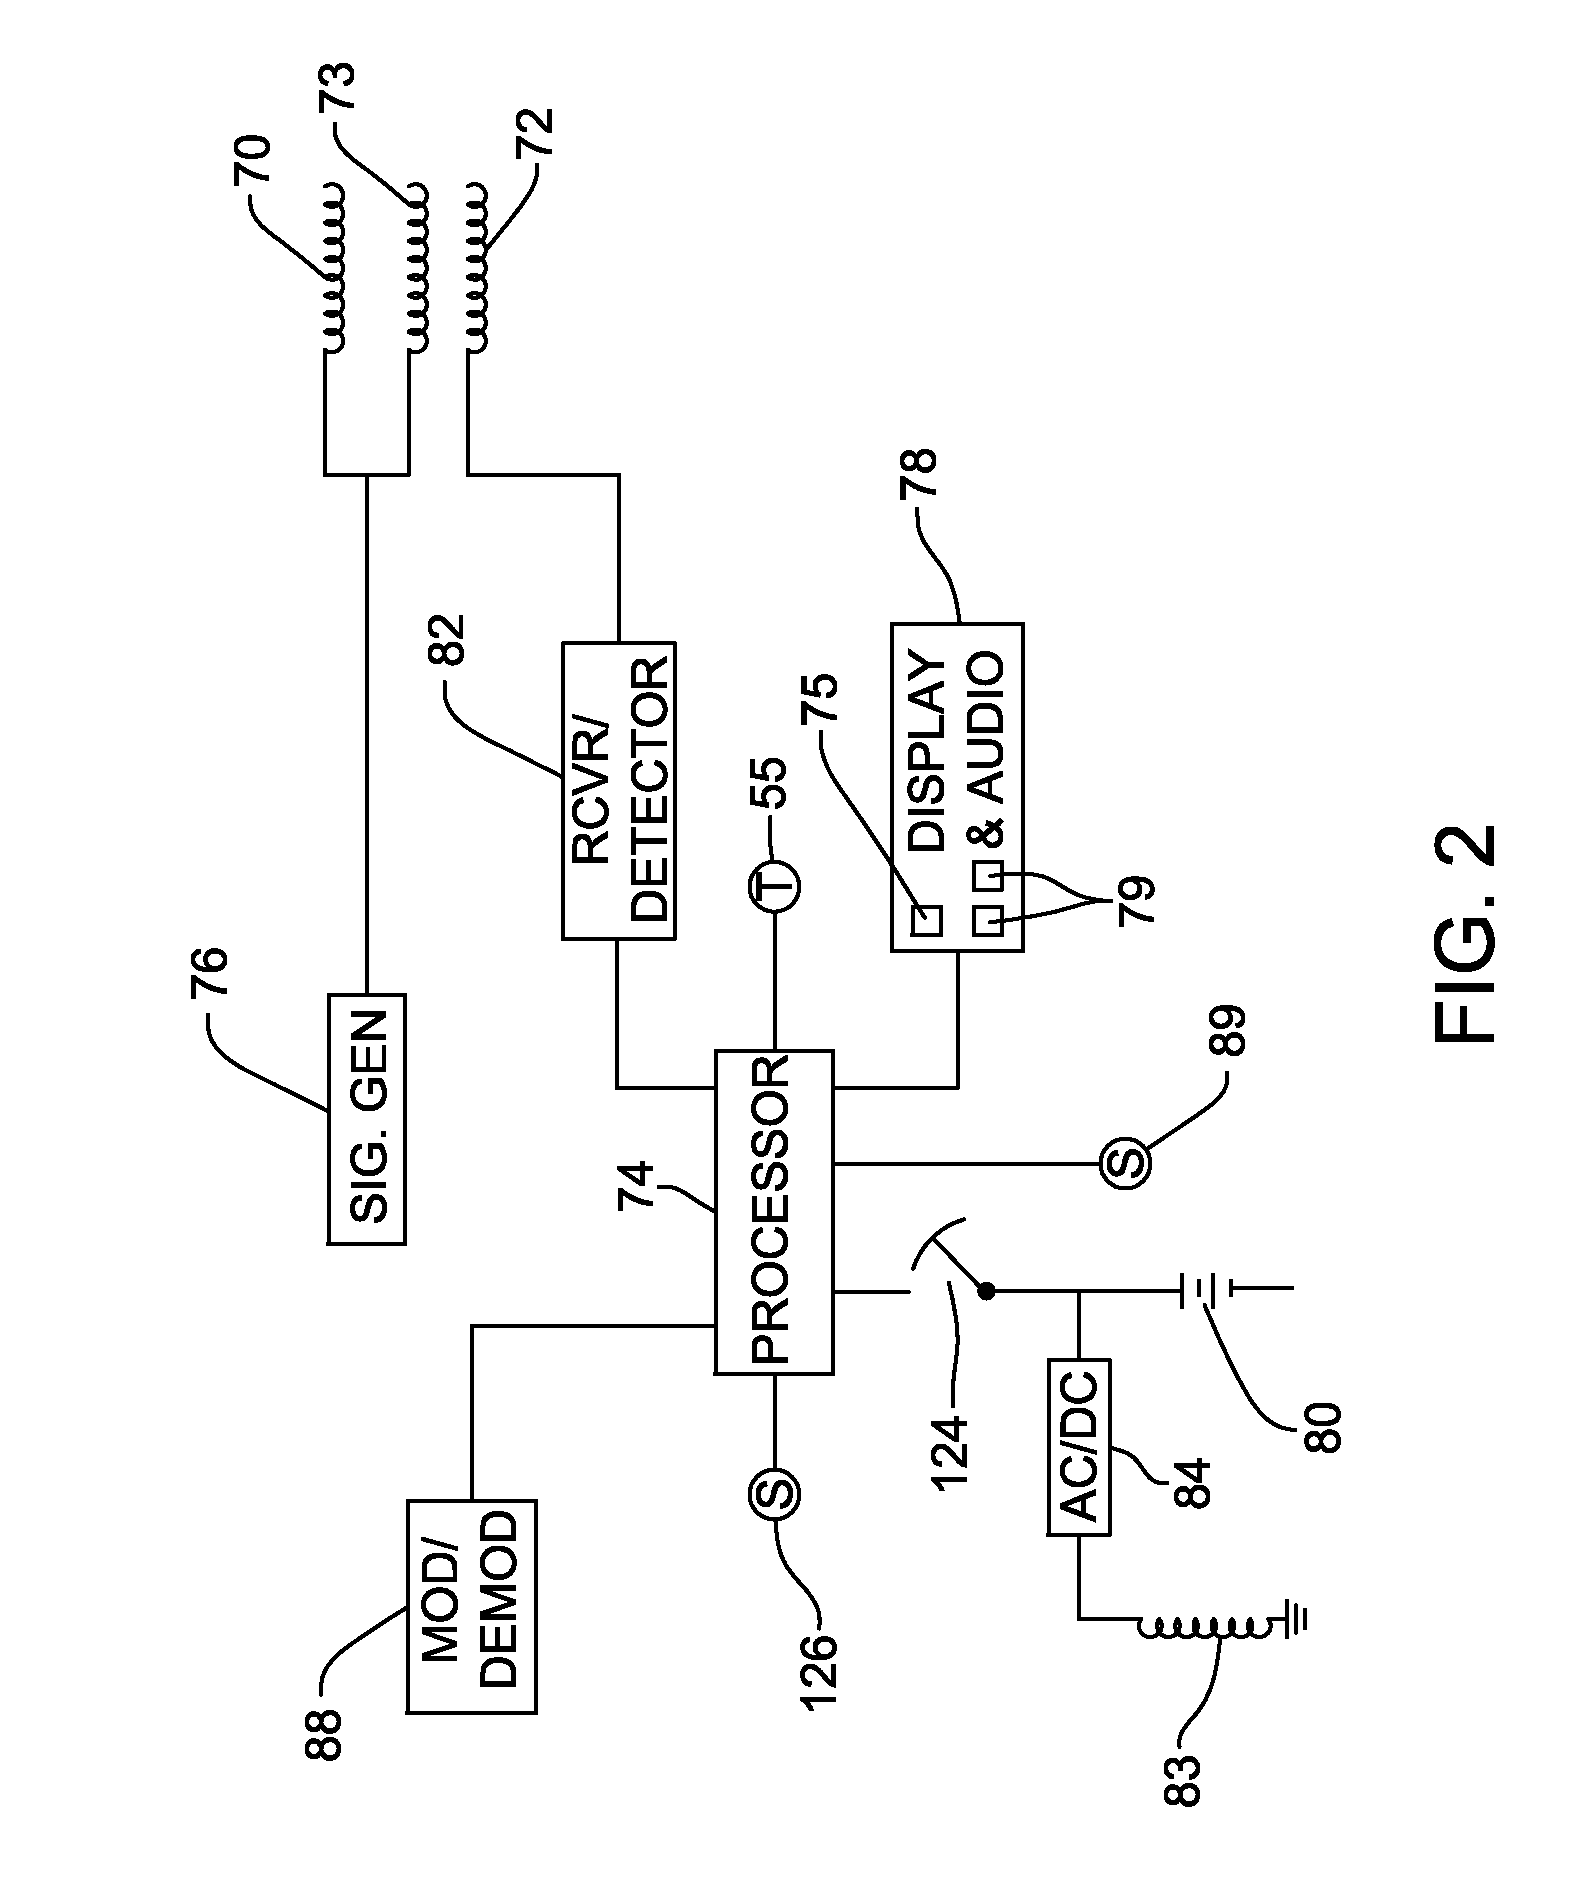 Waste collection system for collecting solid medical waste including metal detection, pre-detection apparatus, and/or bag- tensioning mechanism